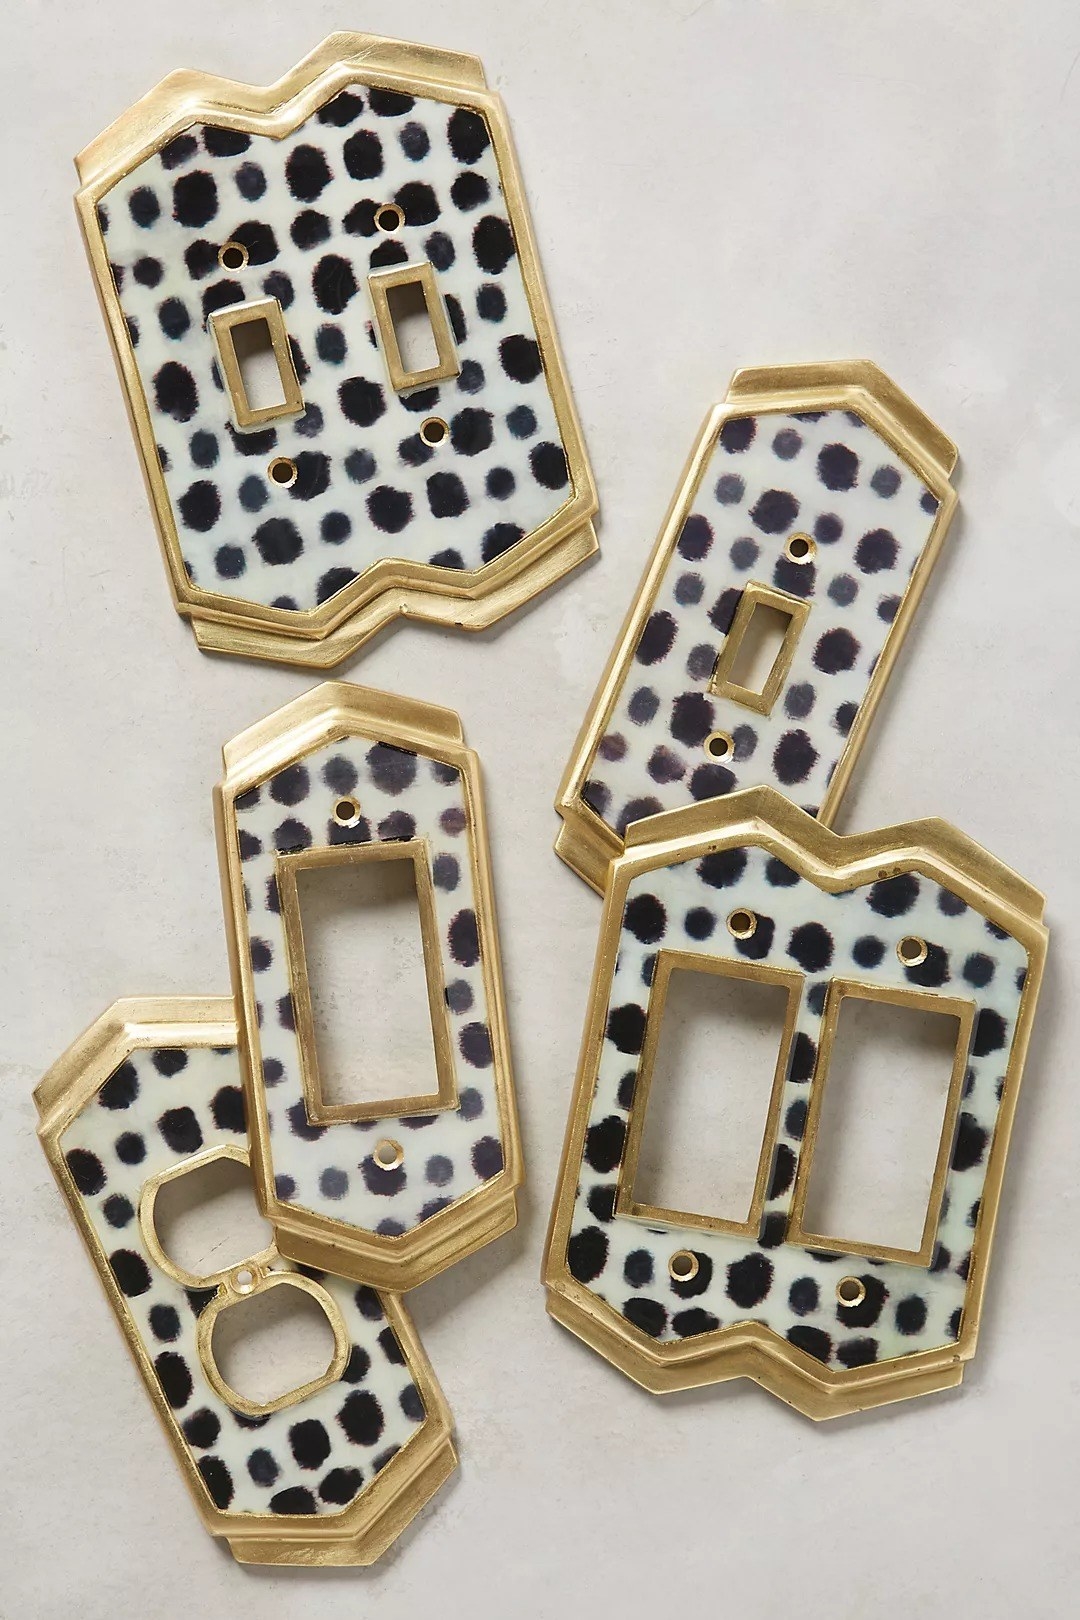 five different black and white dotted switch plate covers